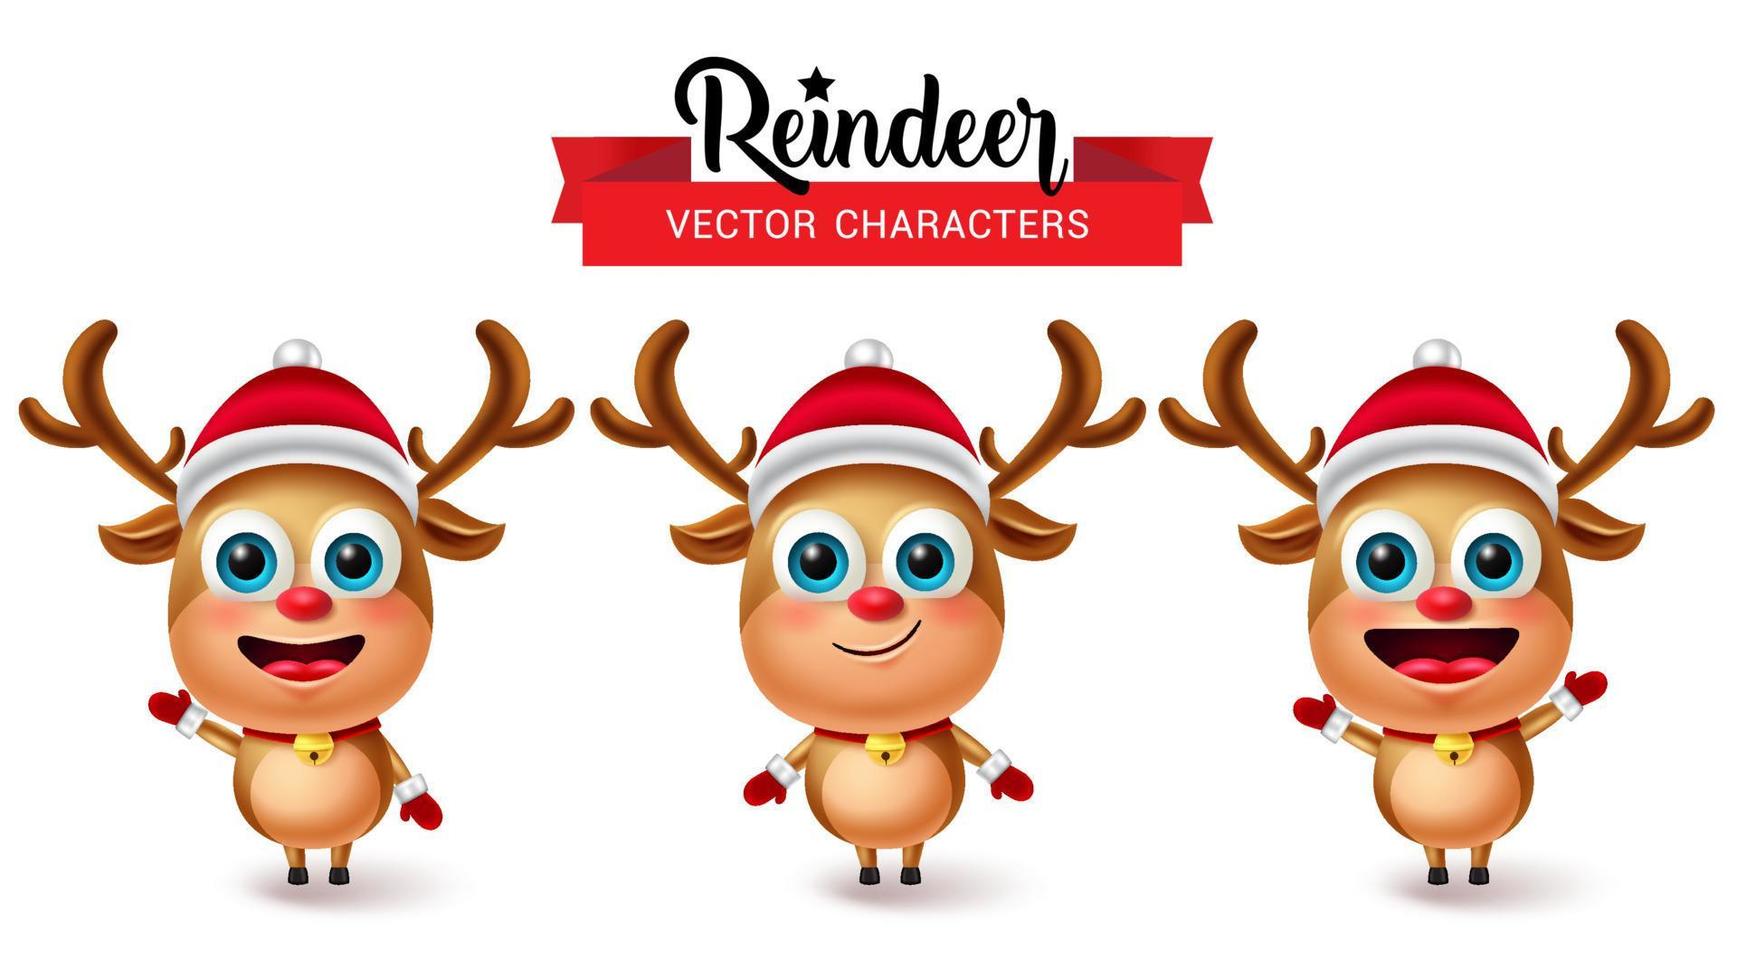 Reindeers christmas vector characters set. Reindeer character in cute facial expressions like friendly and happy for 3d xmas holiday element collection design. Vector illustration.